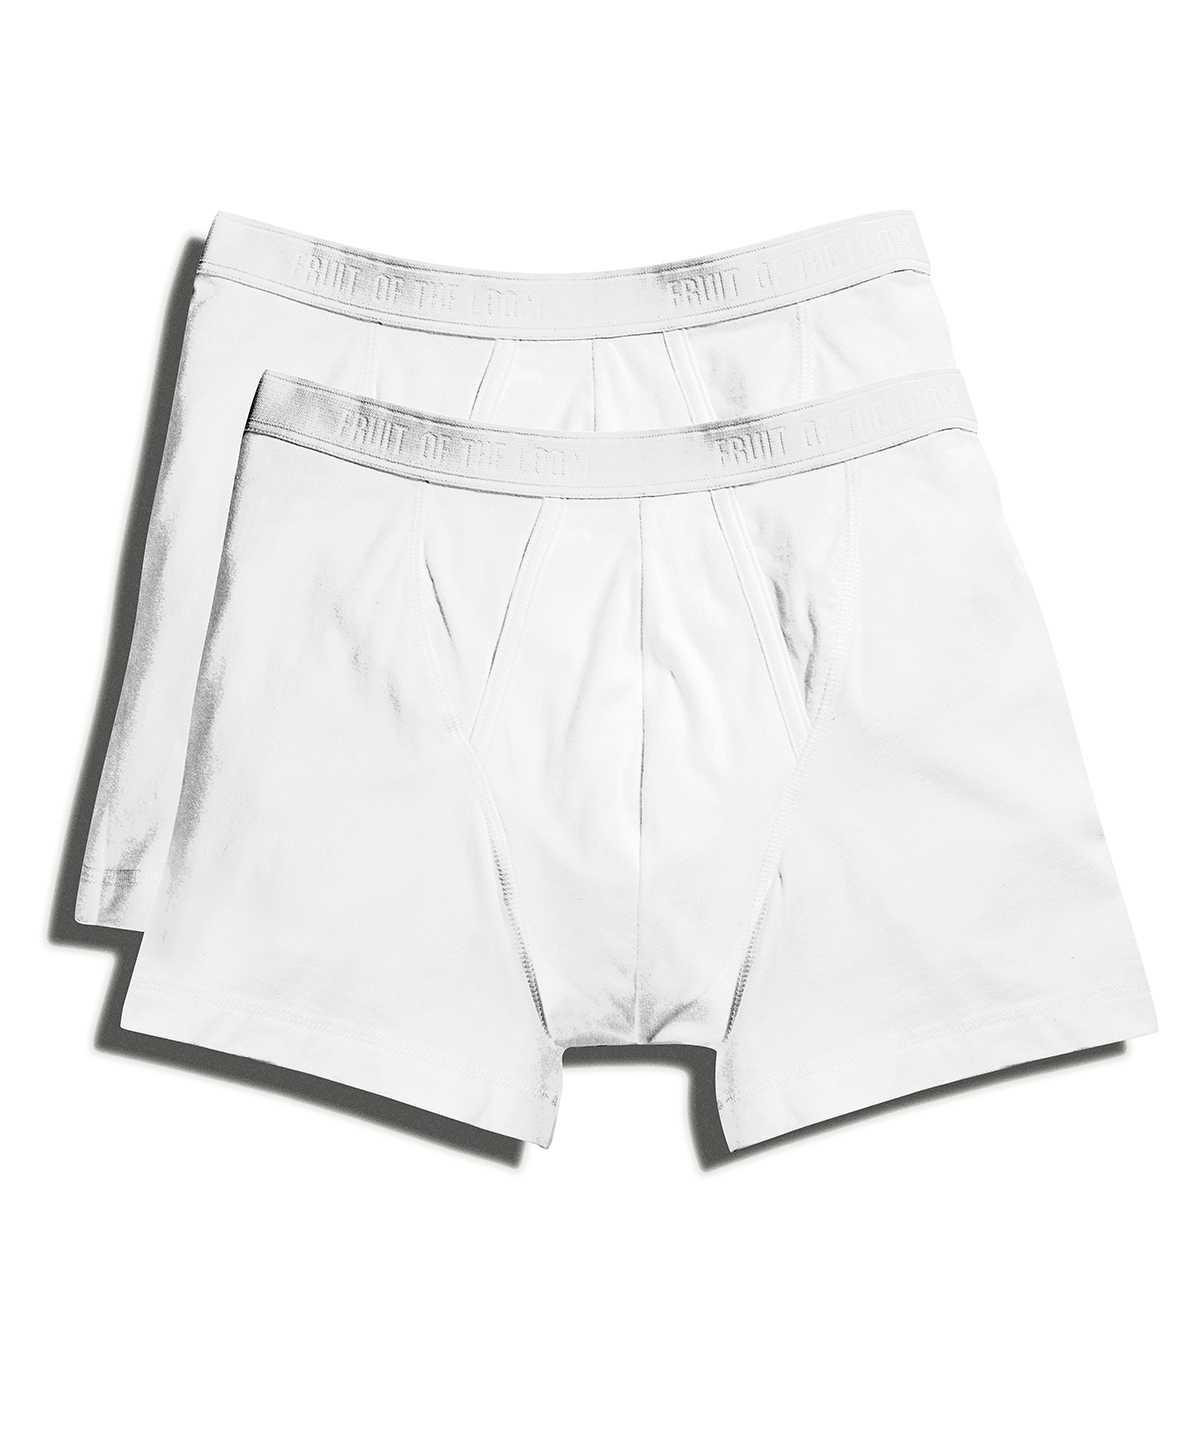 Classic Boxer 2-Pack White Size Small